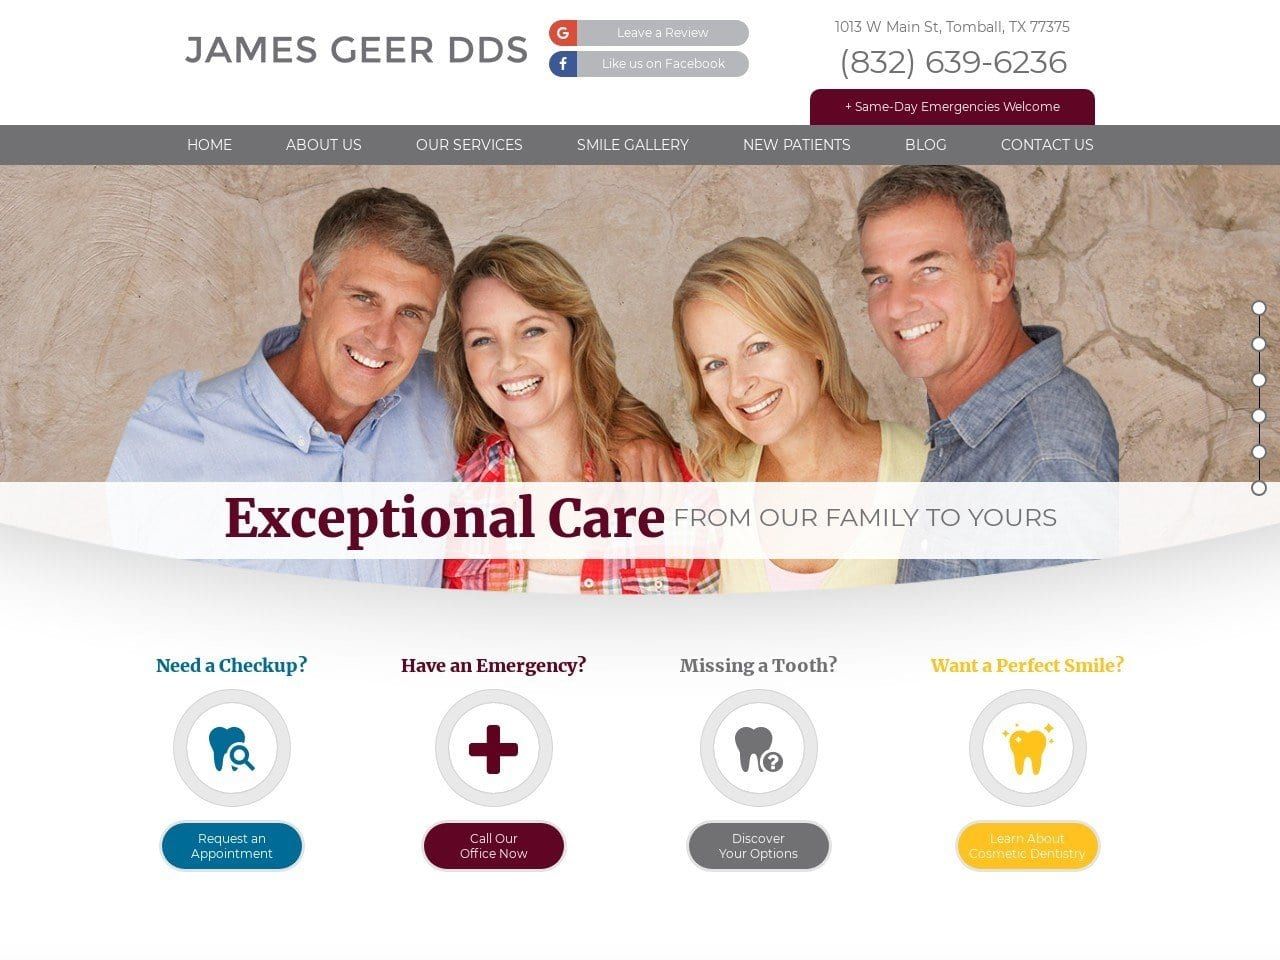 James Geer DDS and Kevin Nail DDS Website Screenshot from tomballdentist.com